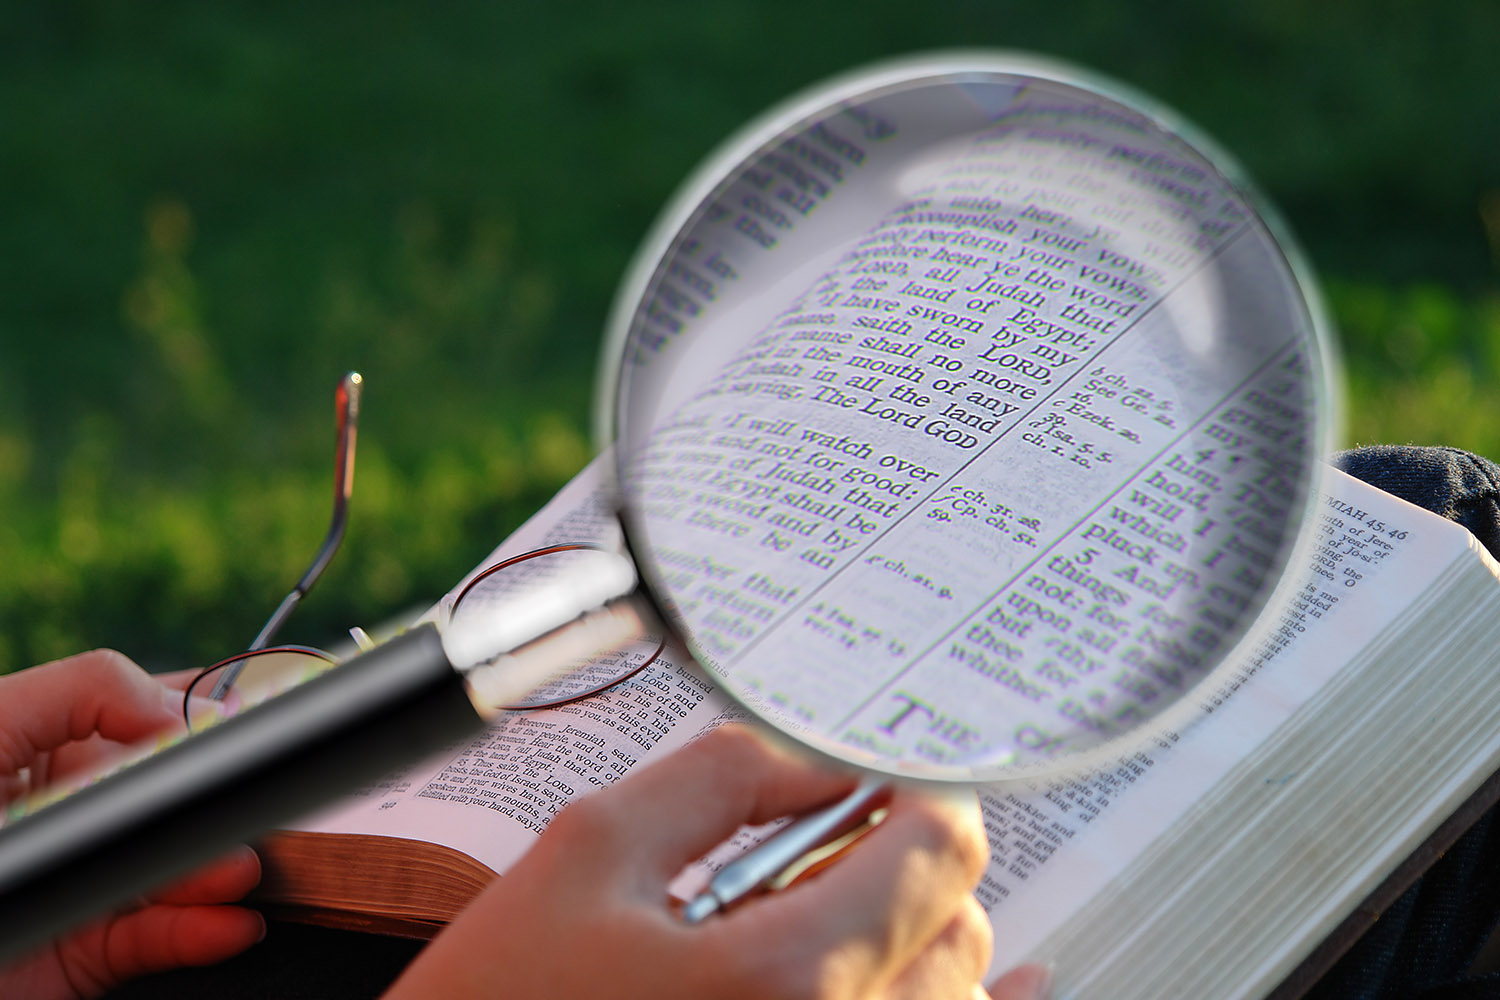 Learn to Discern: How to Determine What Is True